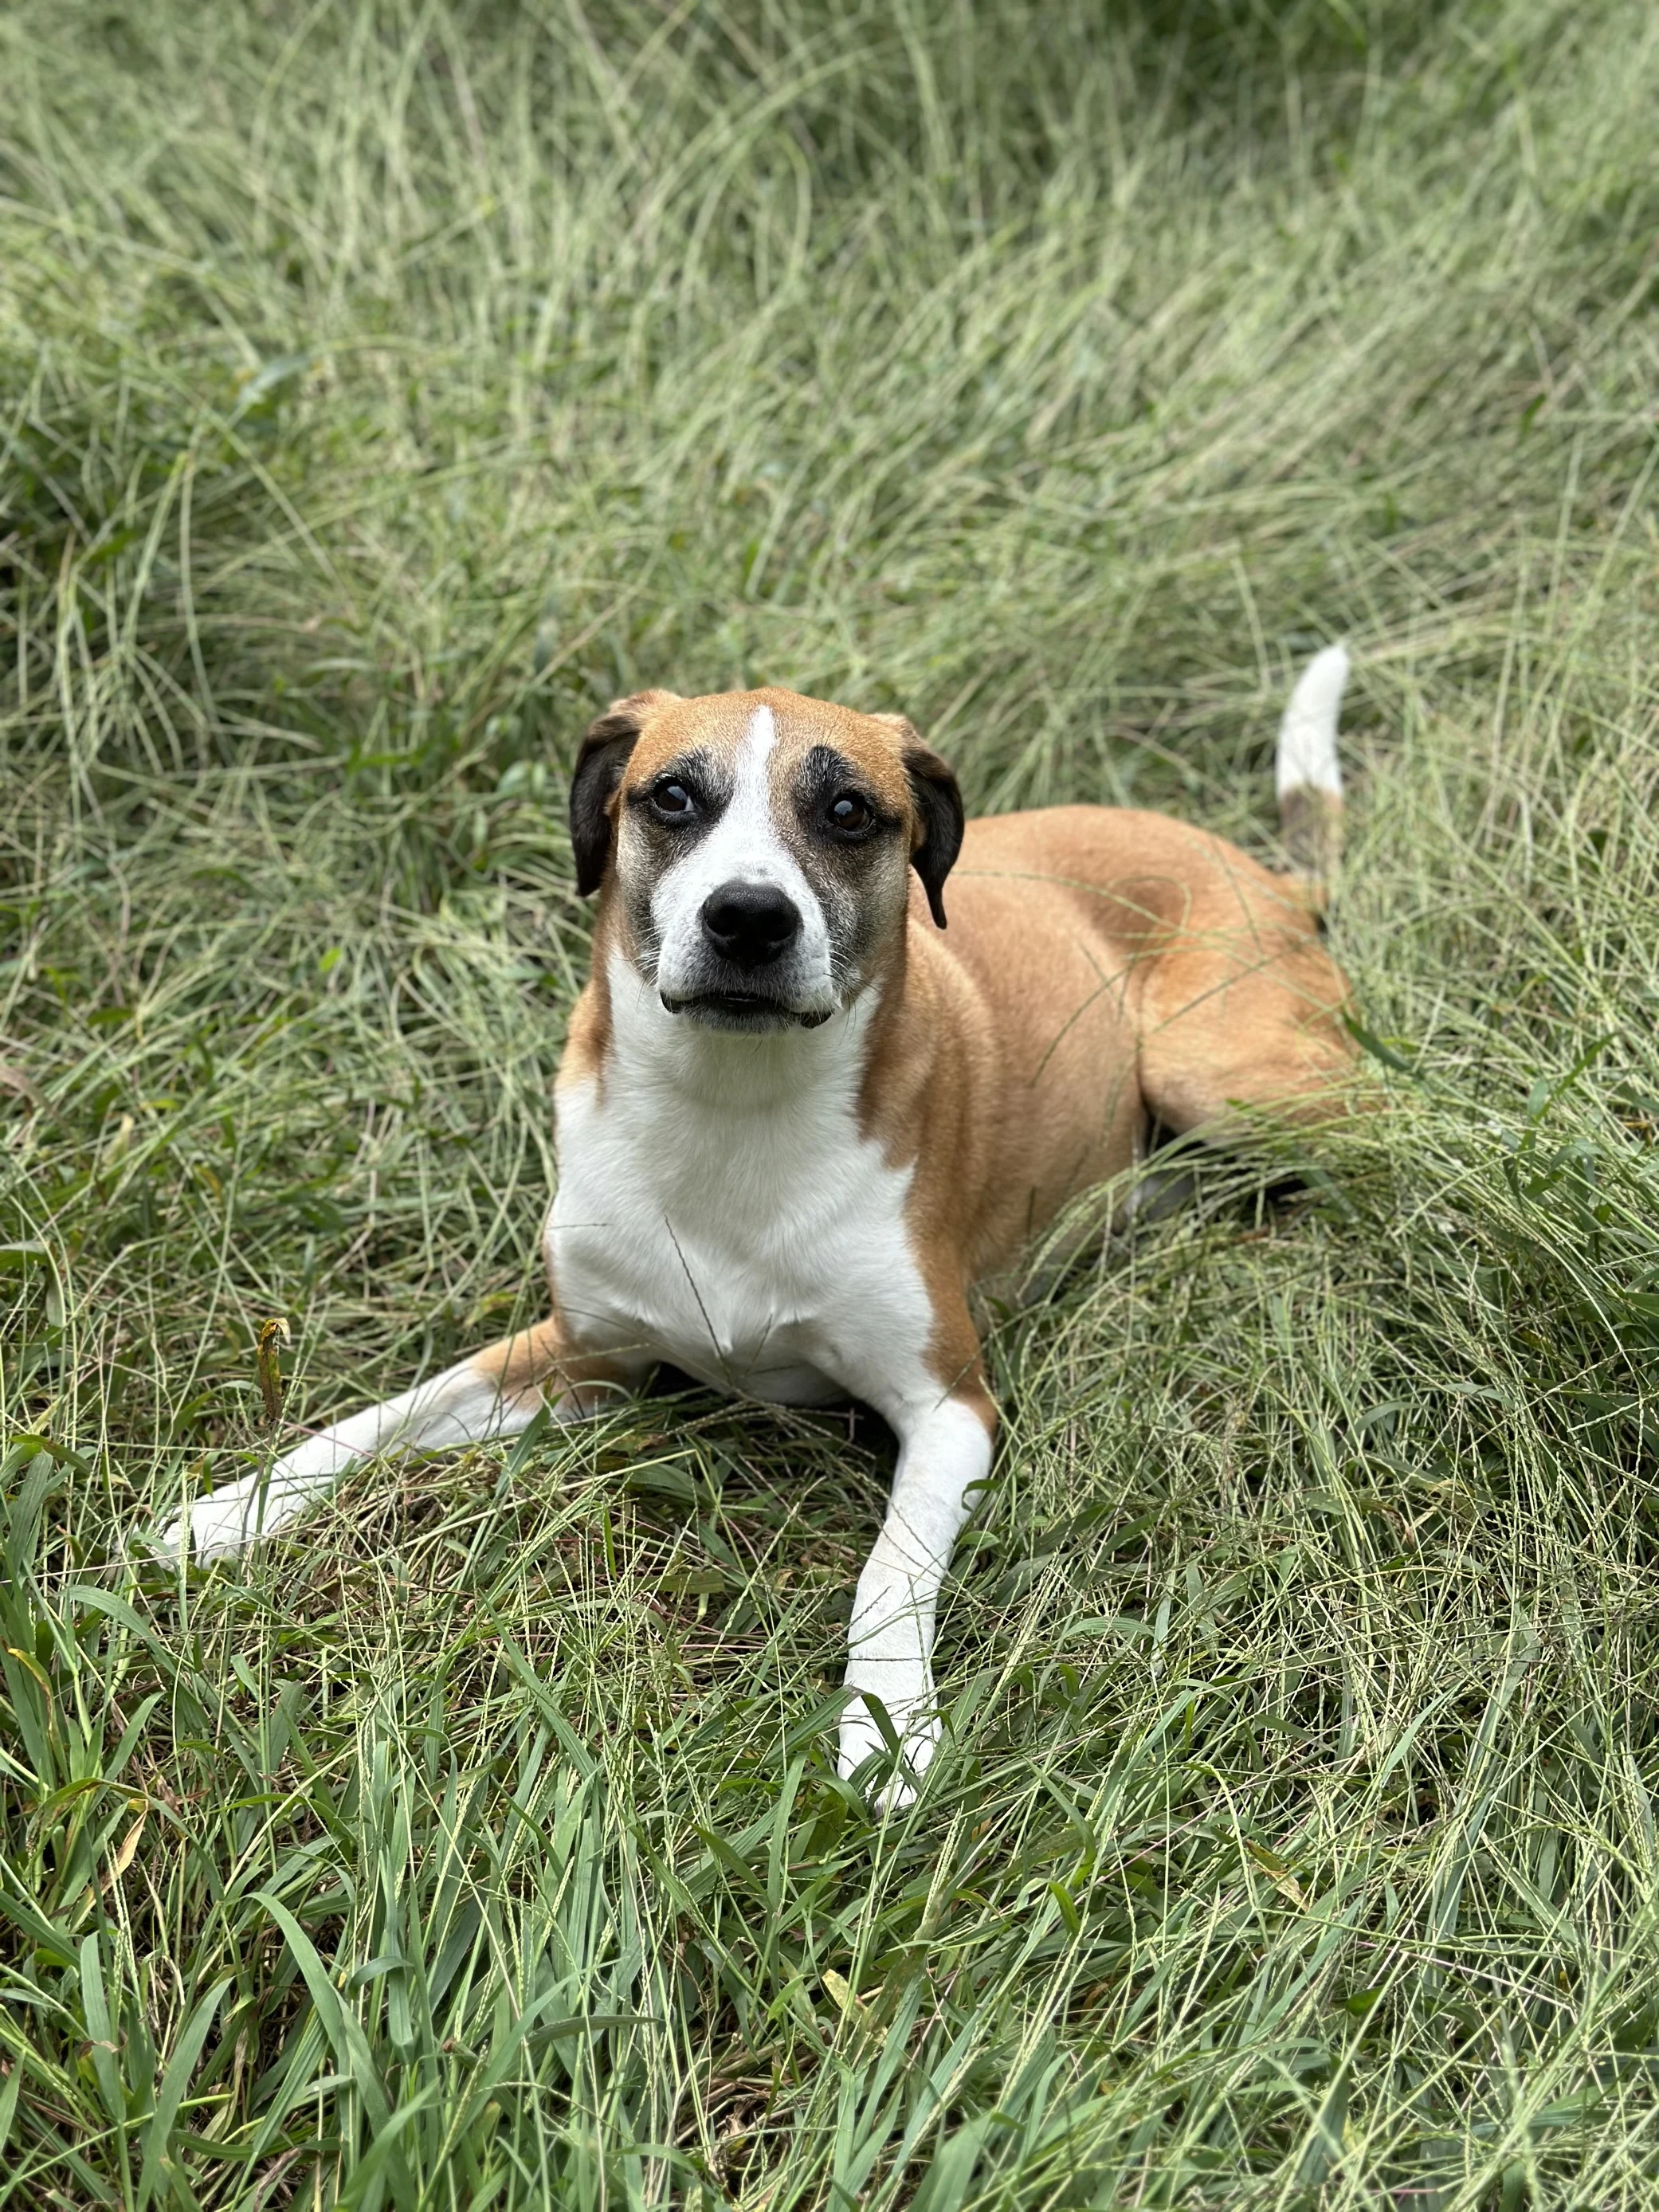 Brown and white dog with dark eyes sitting in grass